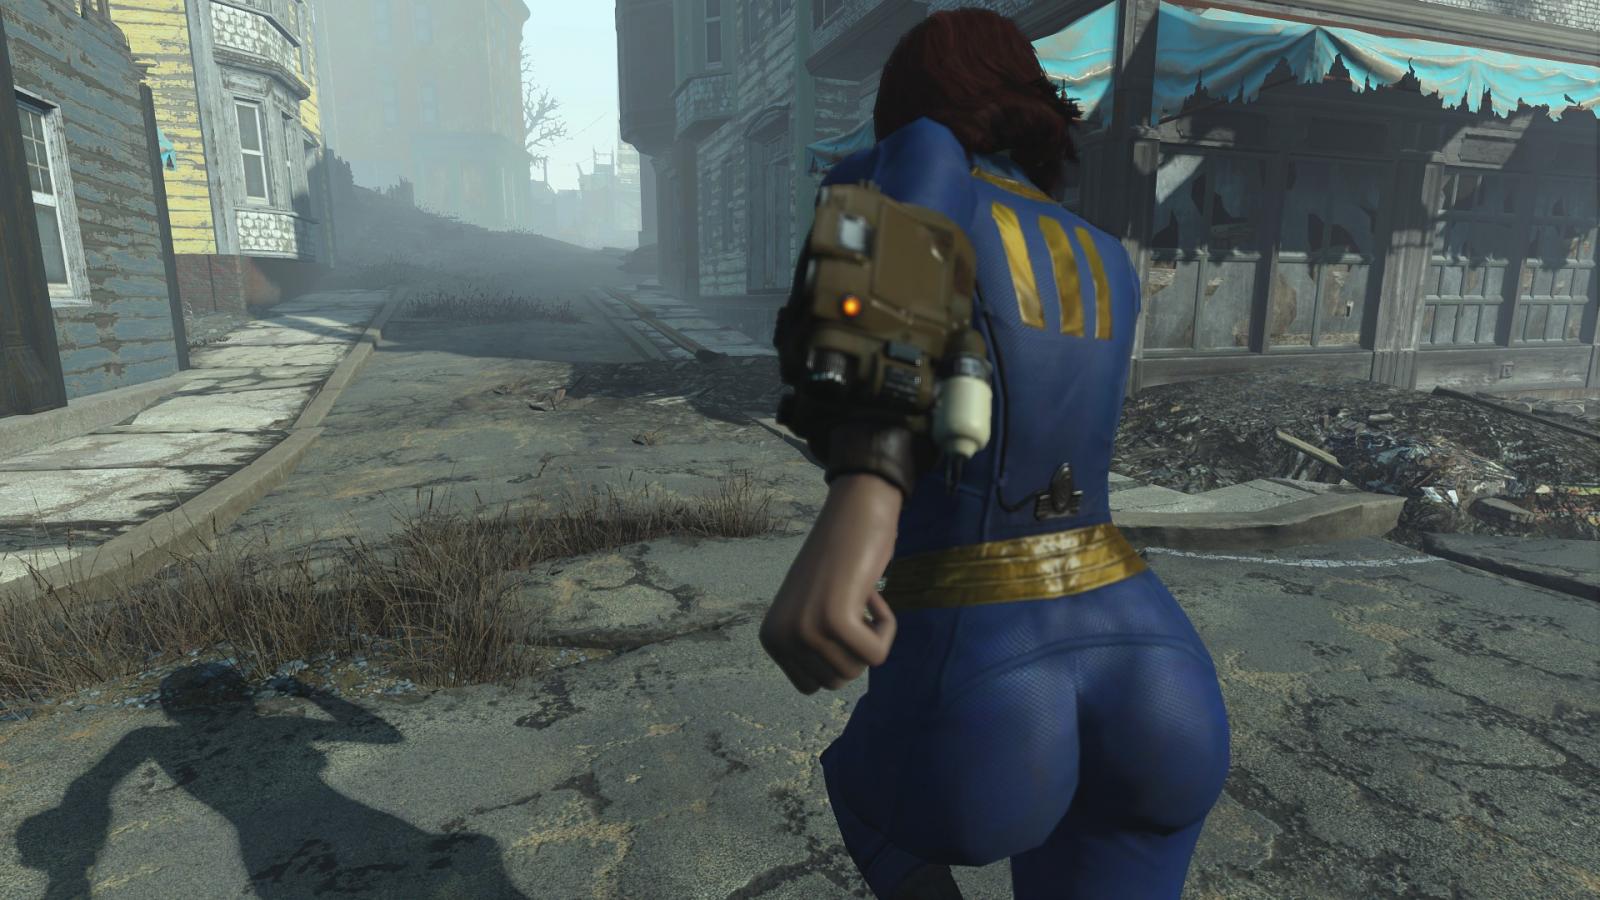 Show Your Fallout 4 Counterpart Page 3 Fallout 4 General Discussion 